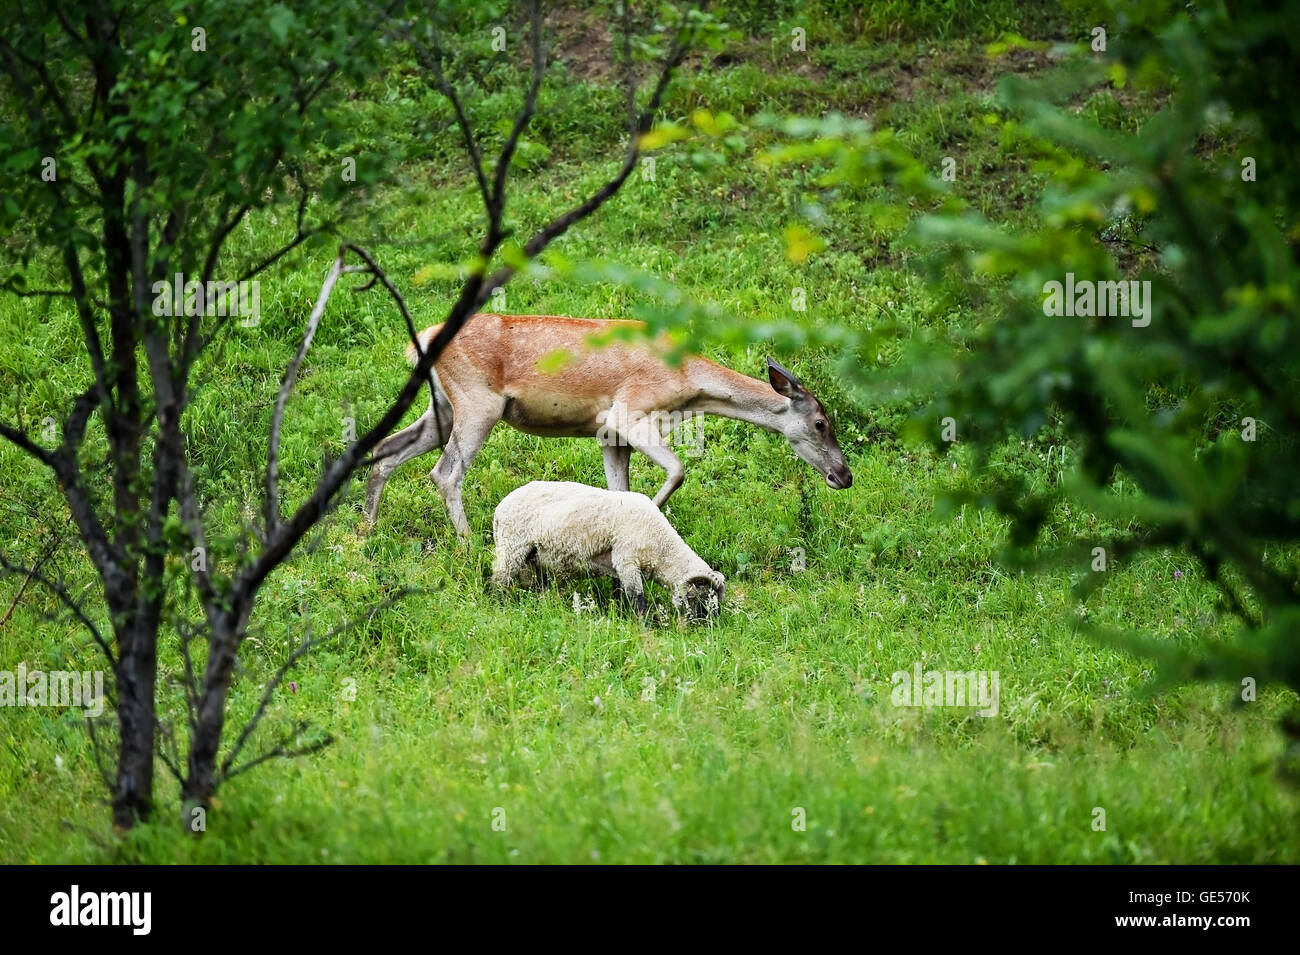 A deer graze next to sheep on a meadow Stock Photo